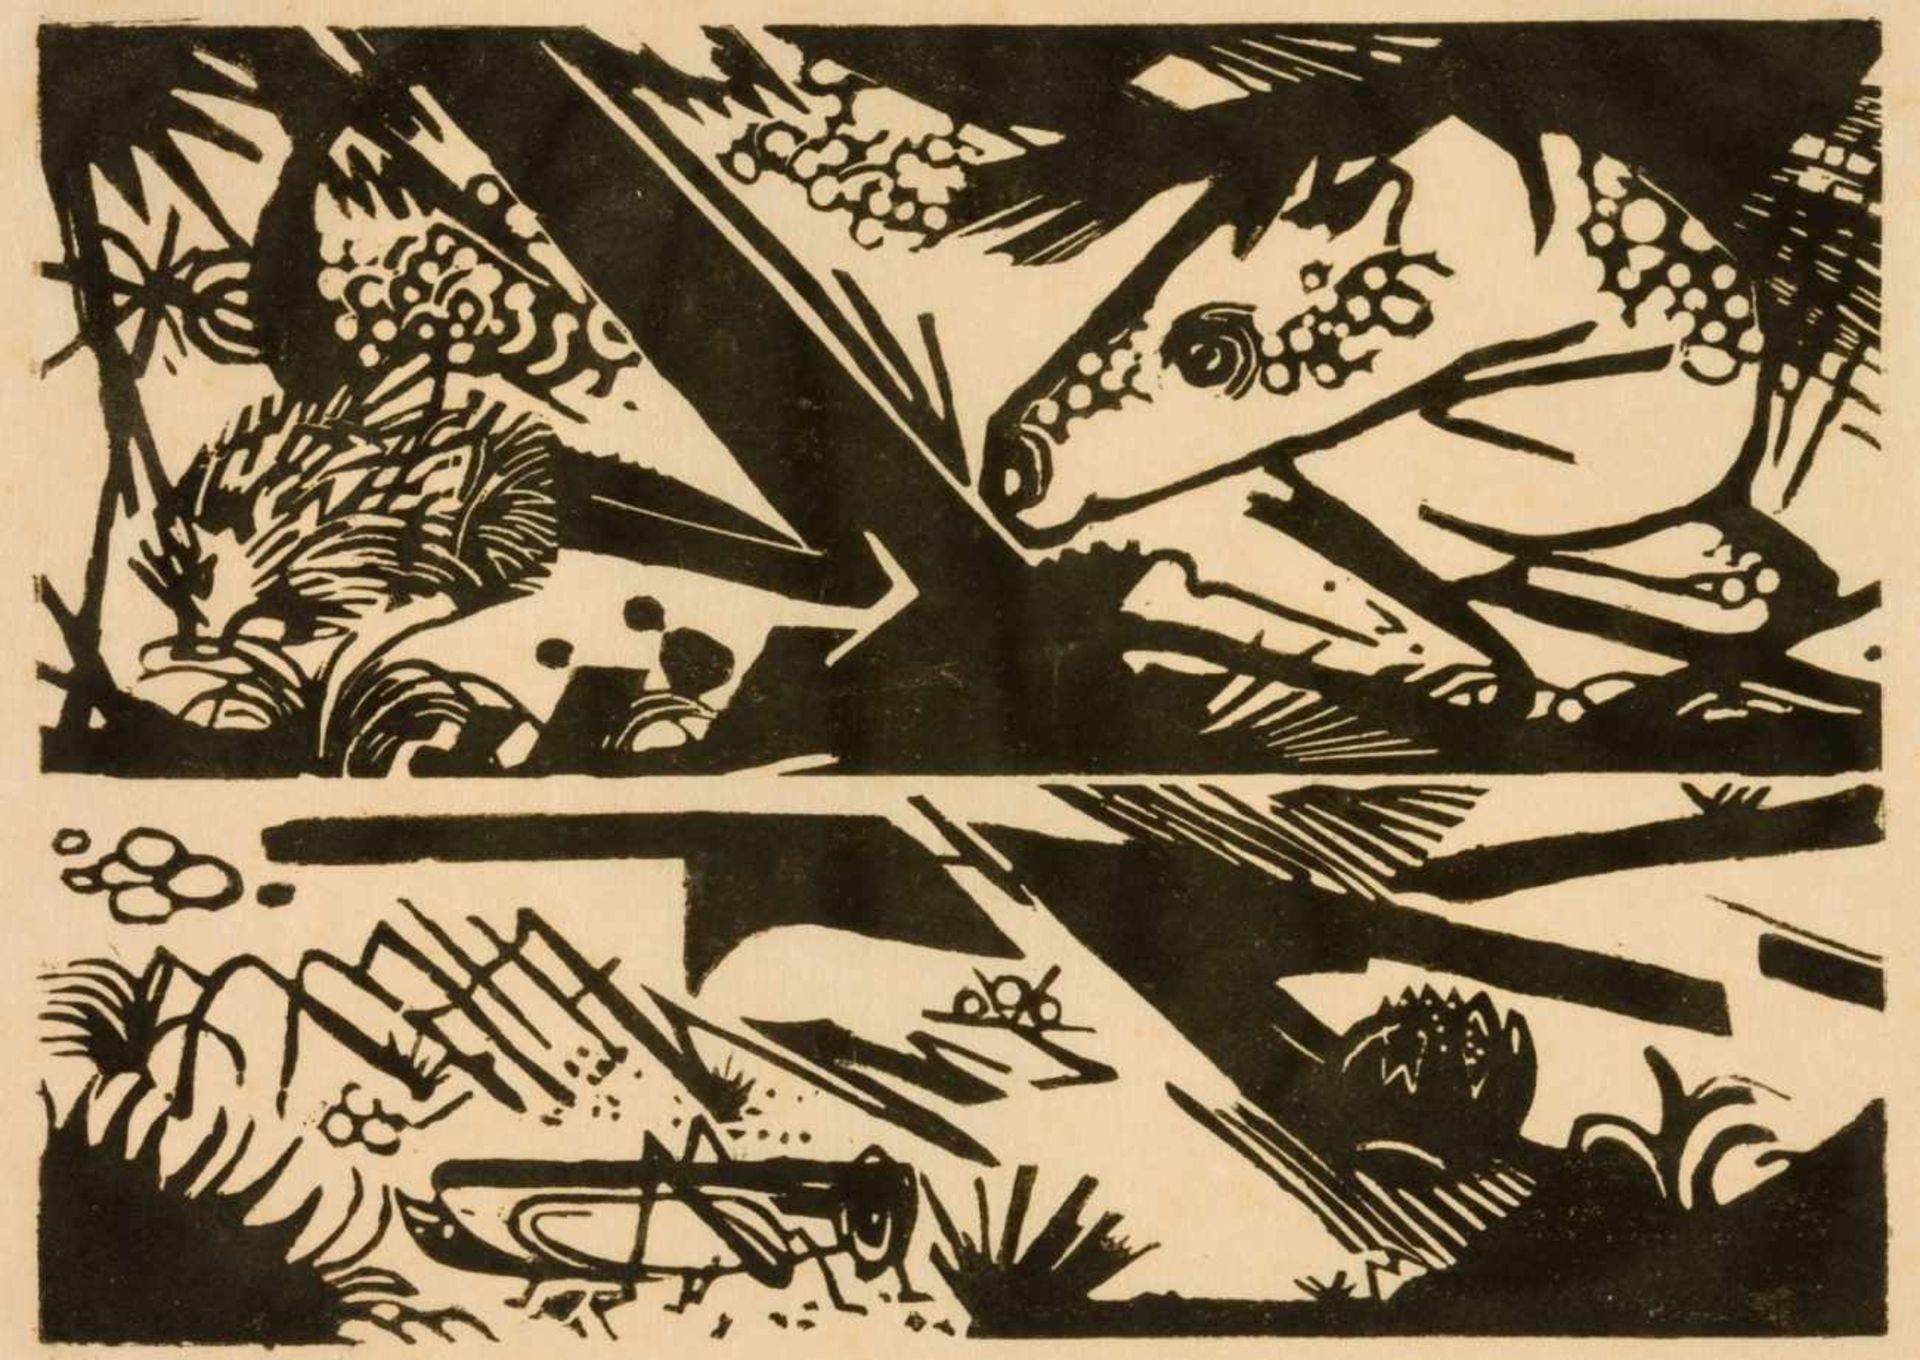 Franz MARC (1880-1916), Horse and Hedgehog, Woodcut on Japan, verso with seal: estate ofFranz